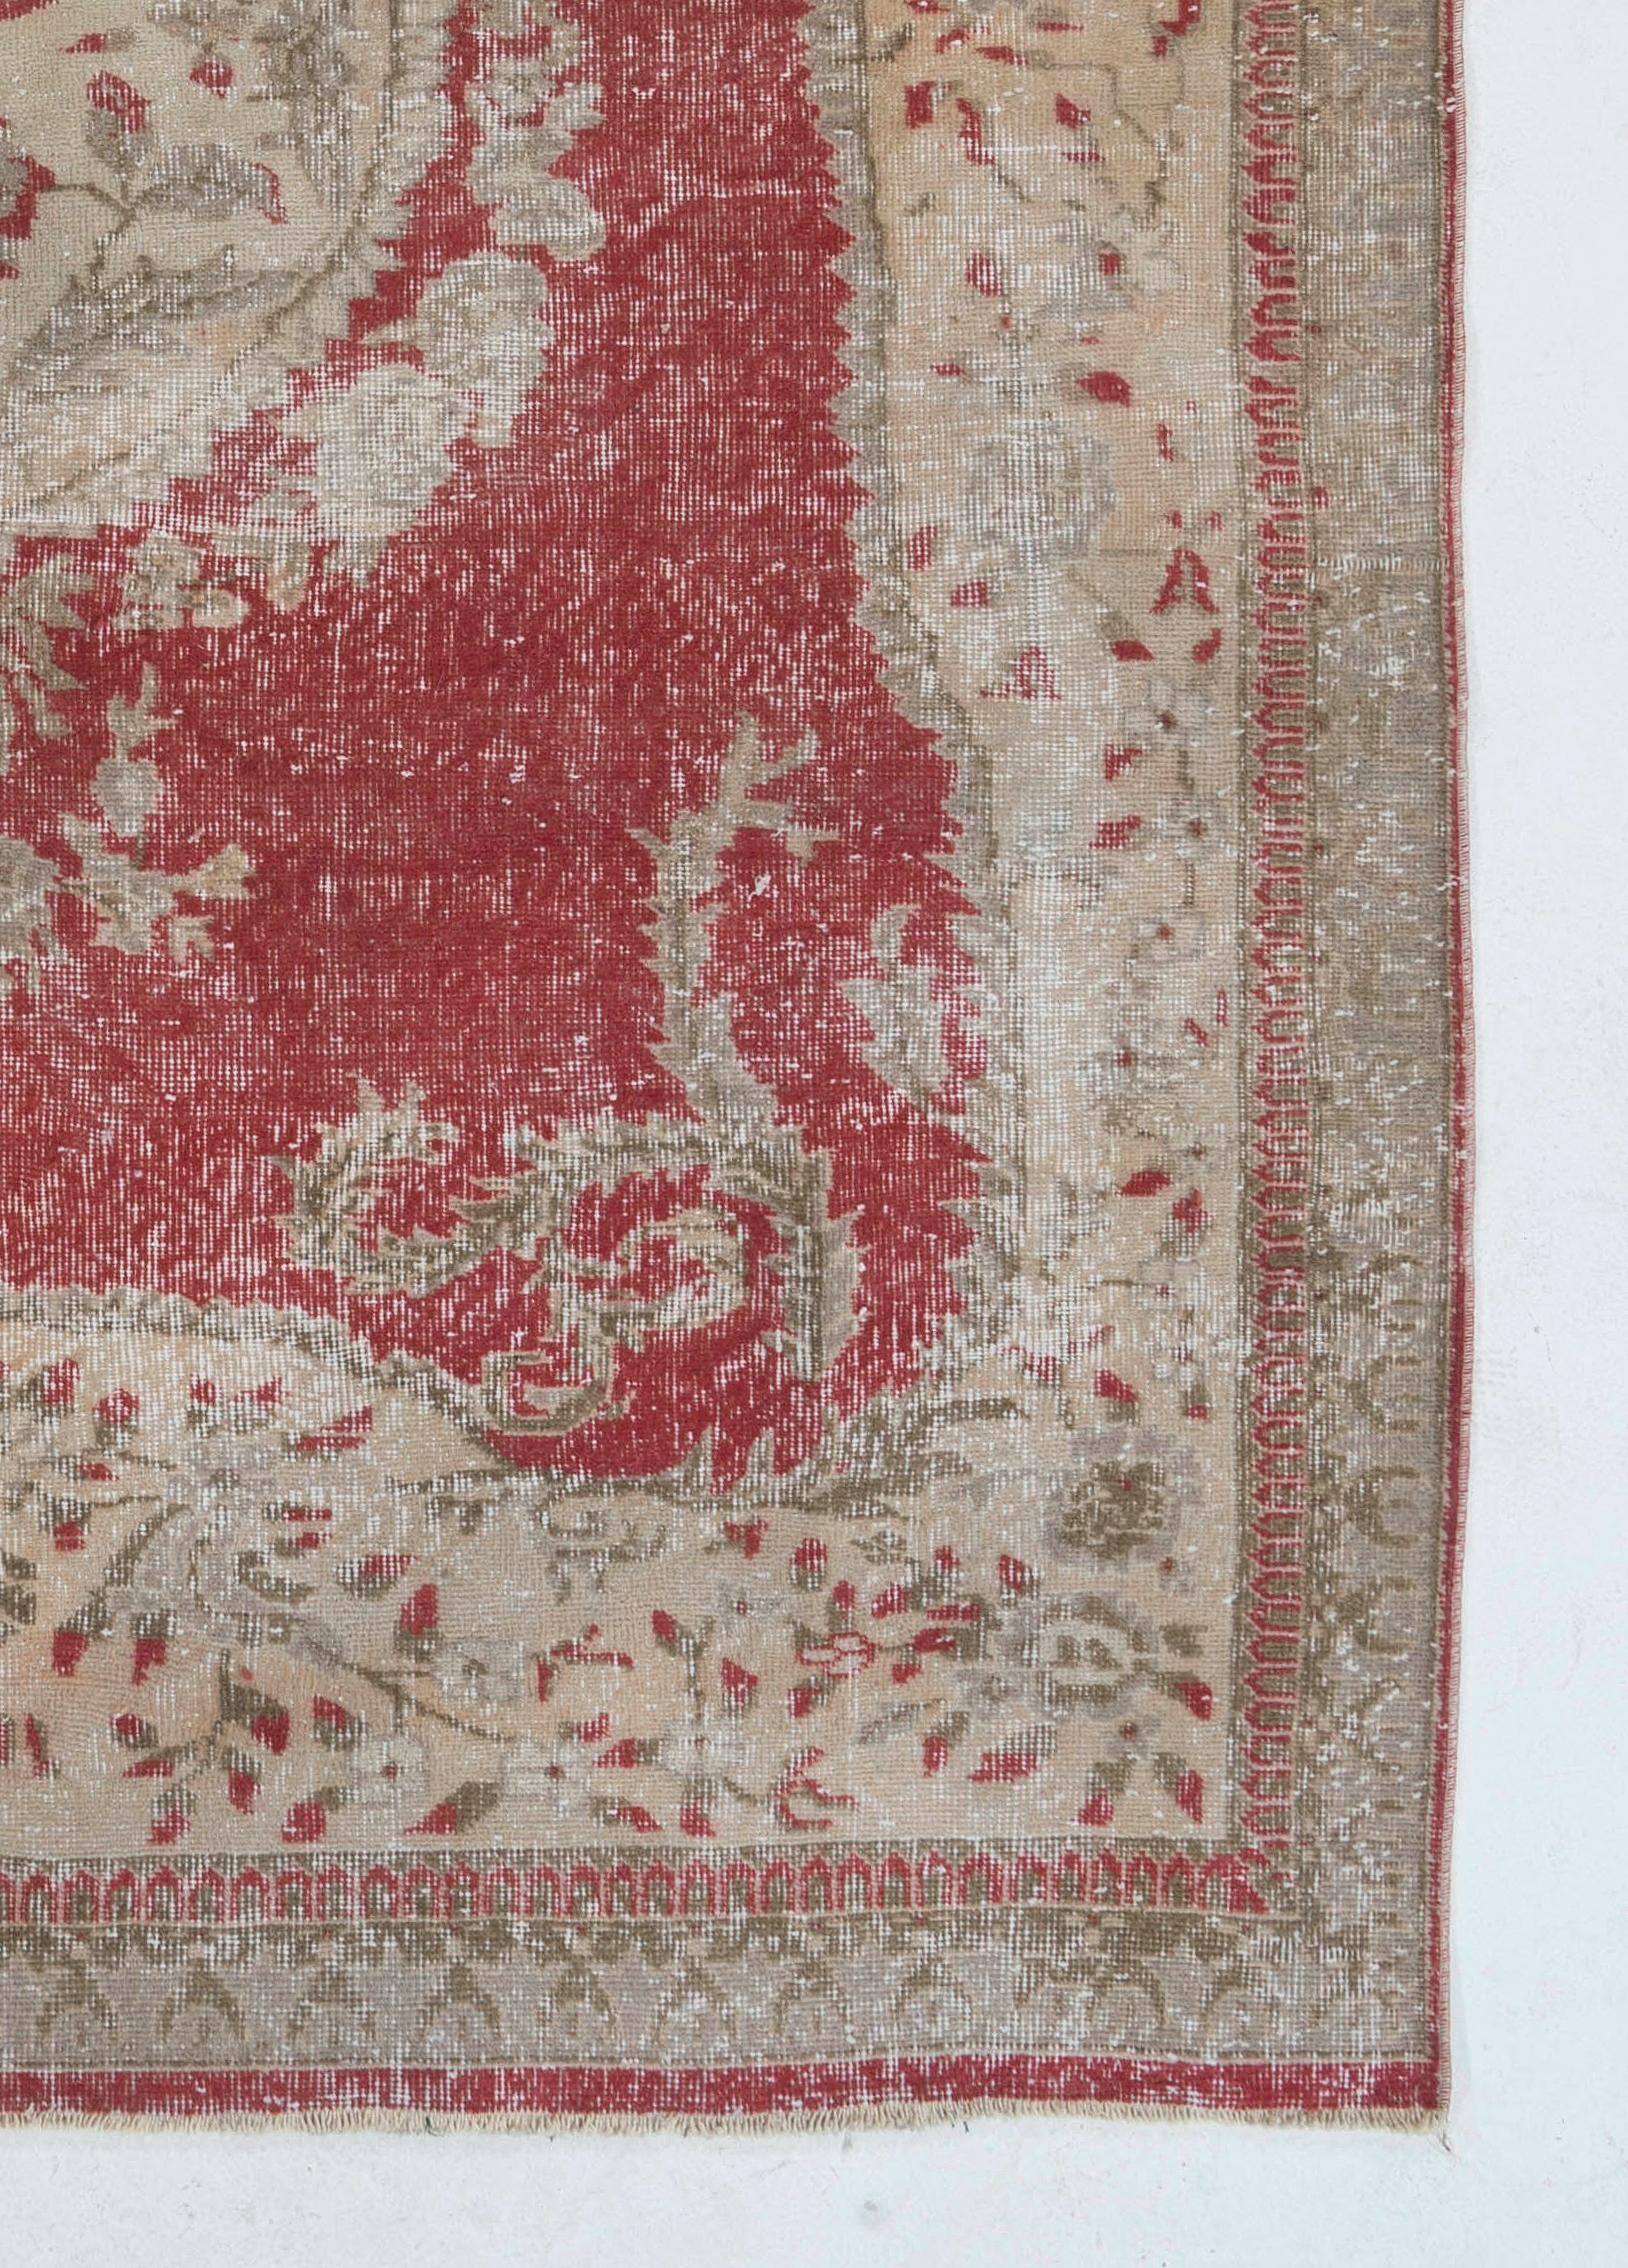 Wool 6.5x9.5 Ft Vintage Aubusson Inspired Turkish Rug in Red, Beige & Taupe Colors For Sale